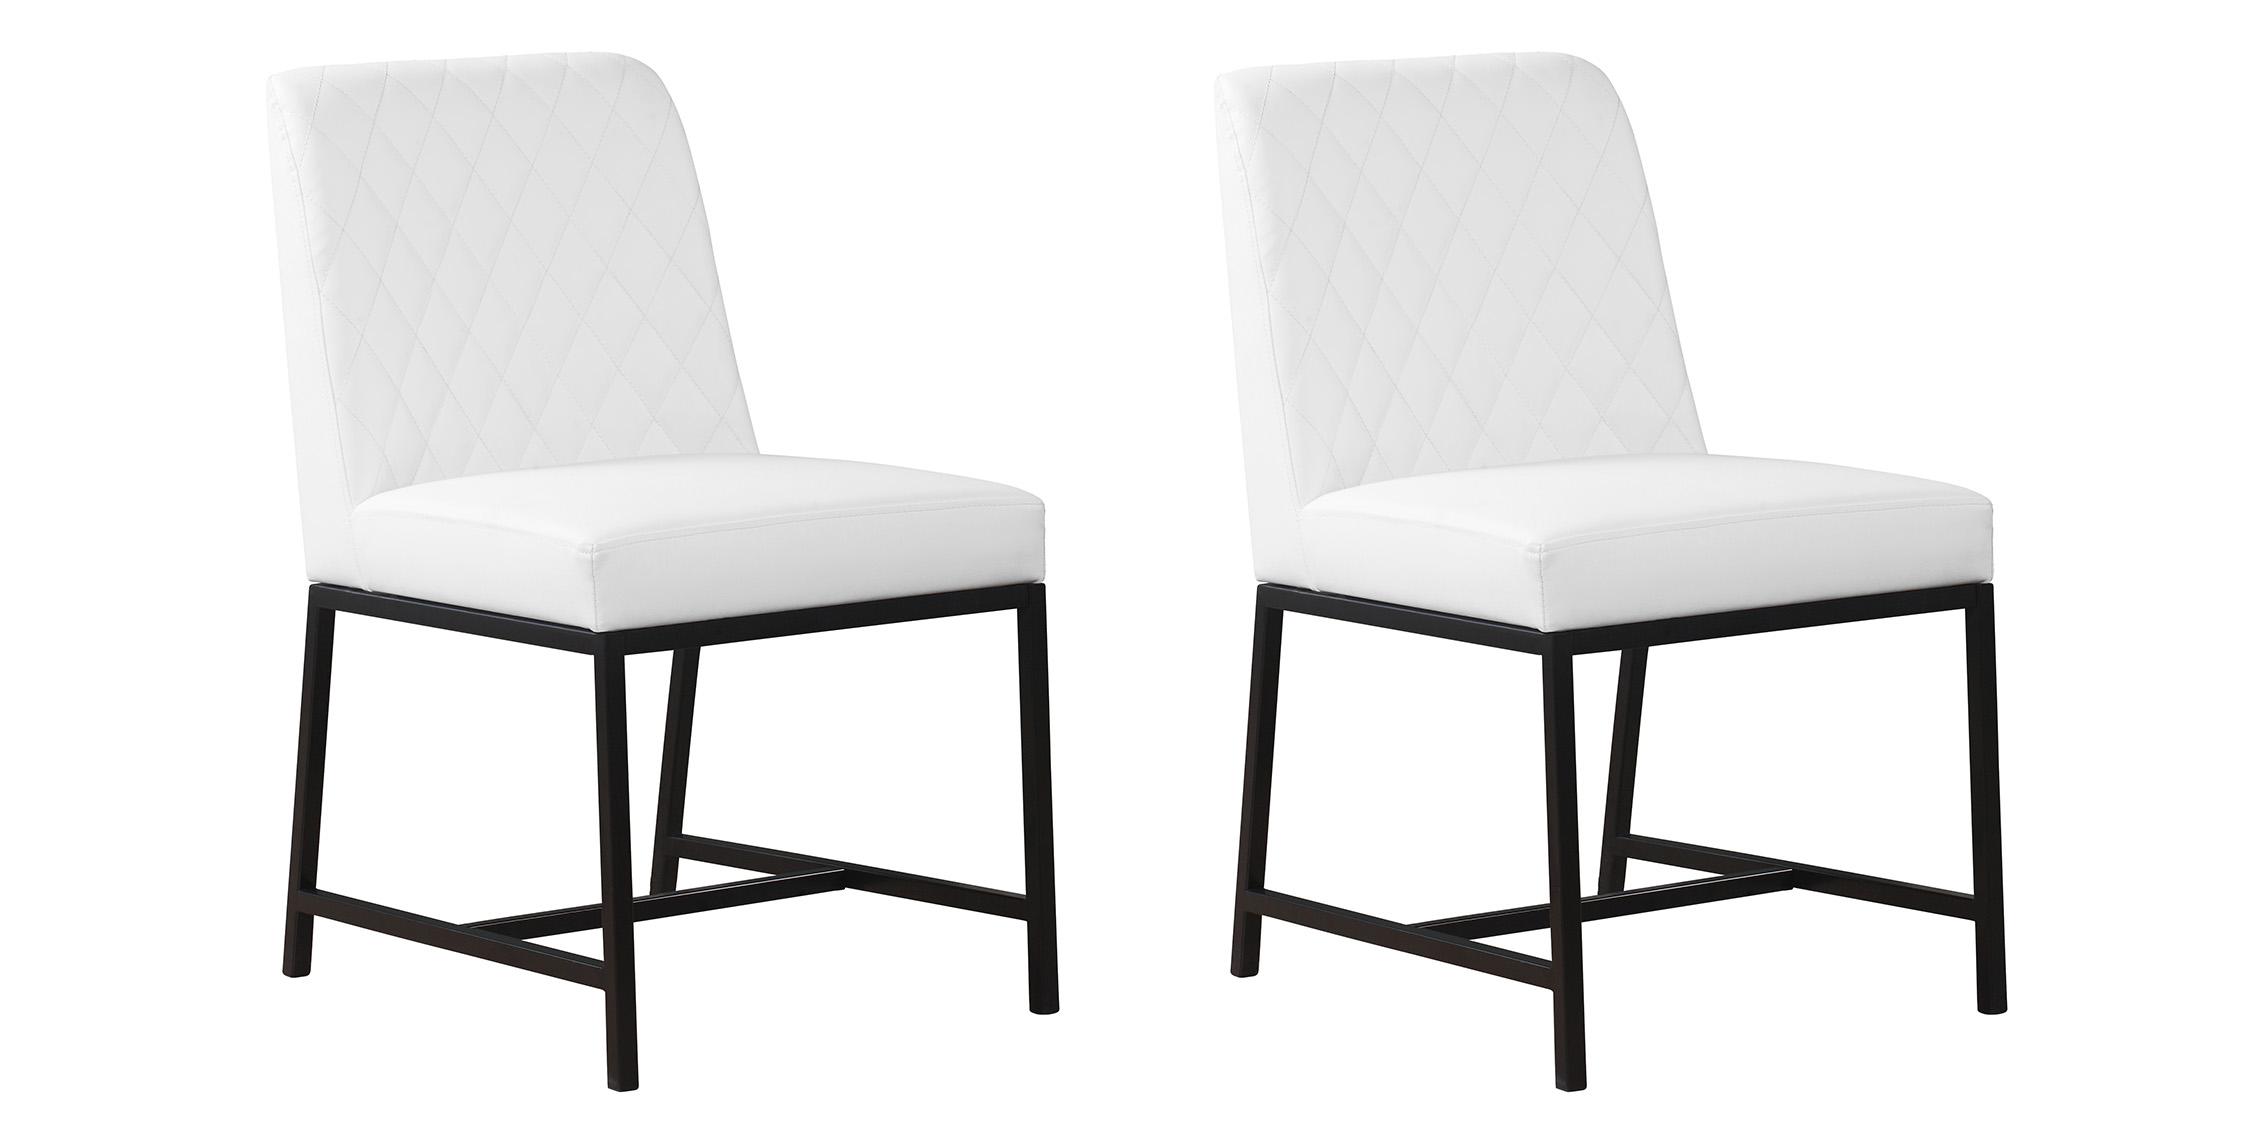 Contemporary, Modern Dining Chair Set BRYCE 918White-C 918White-C-Set-2 in White Faux Leather